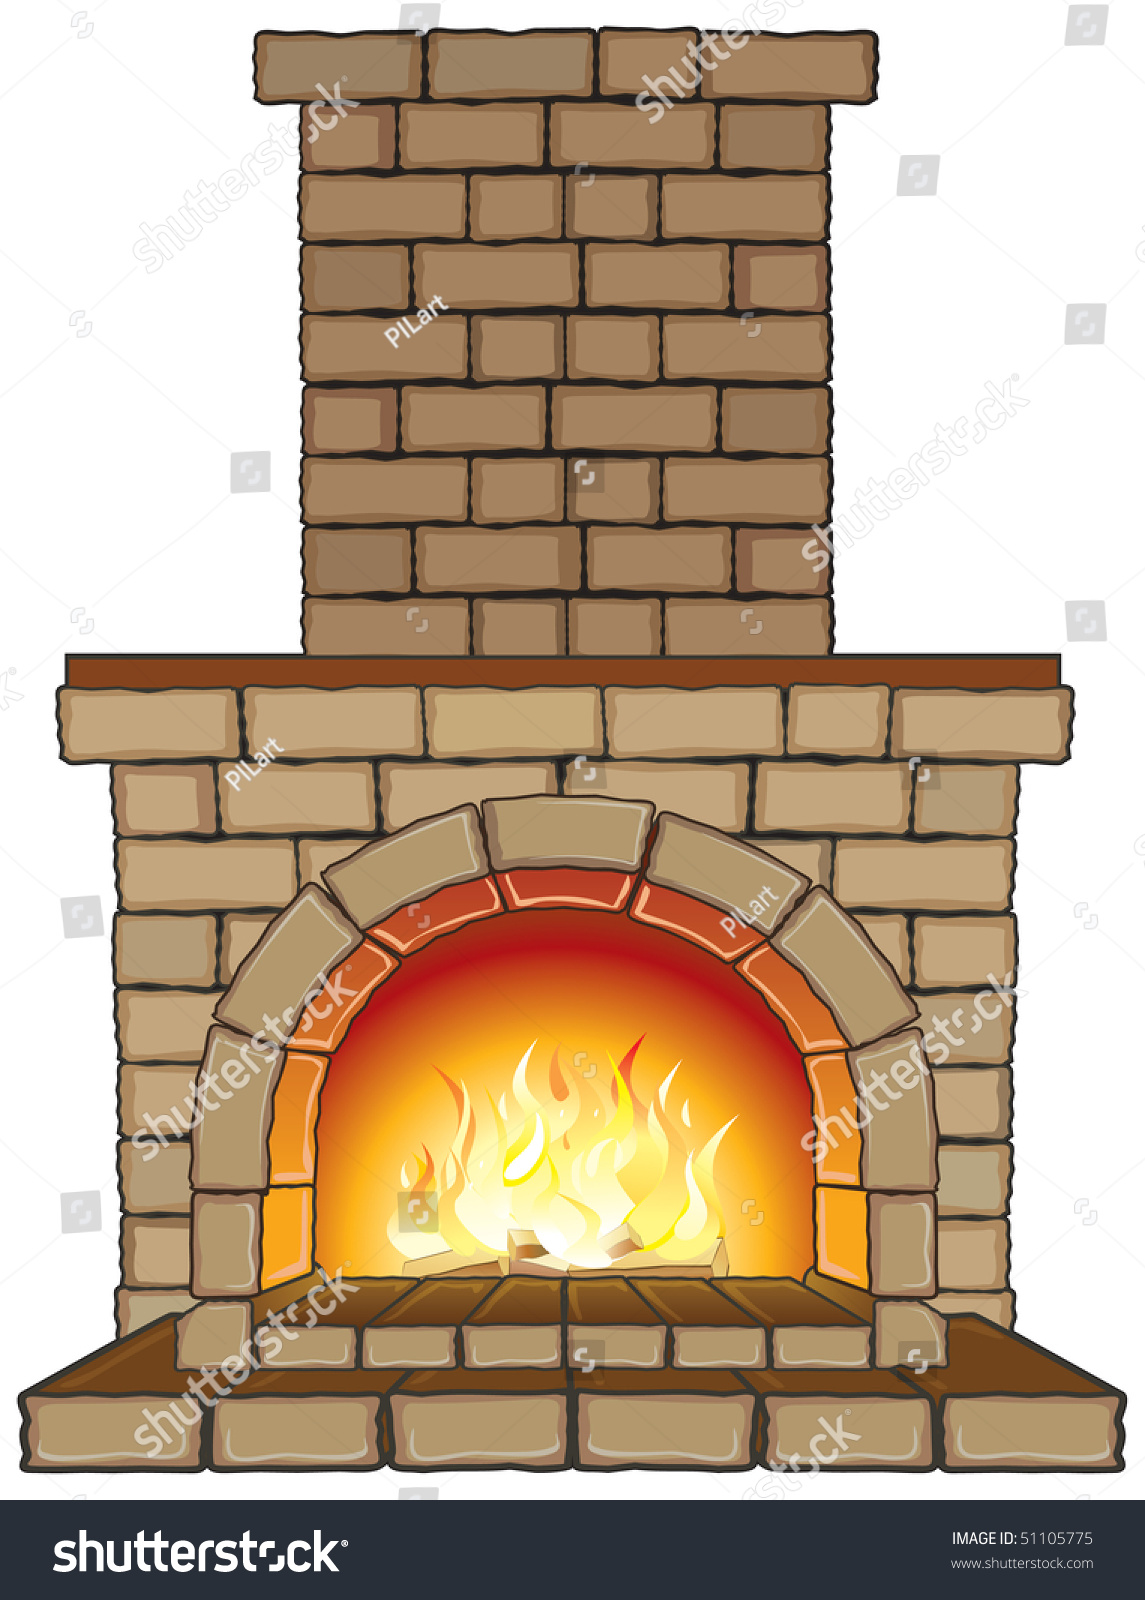 fireplace clipart - photo #18